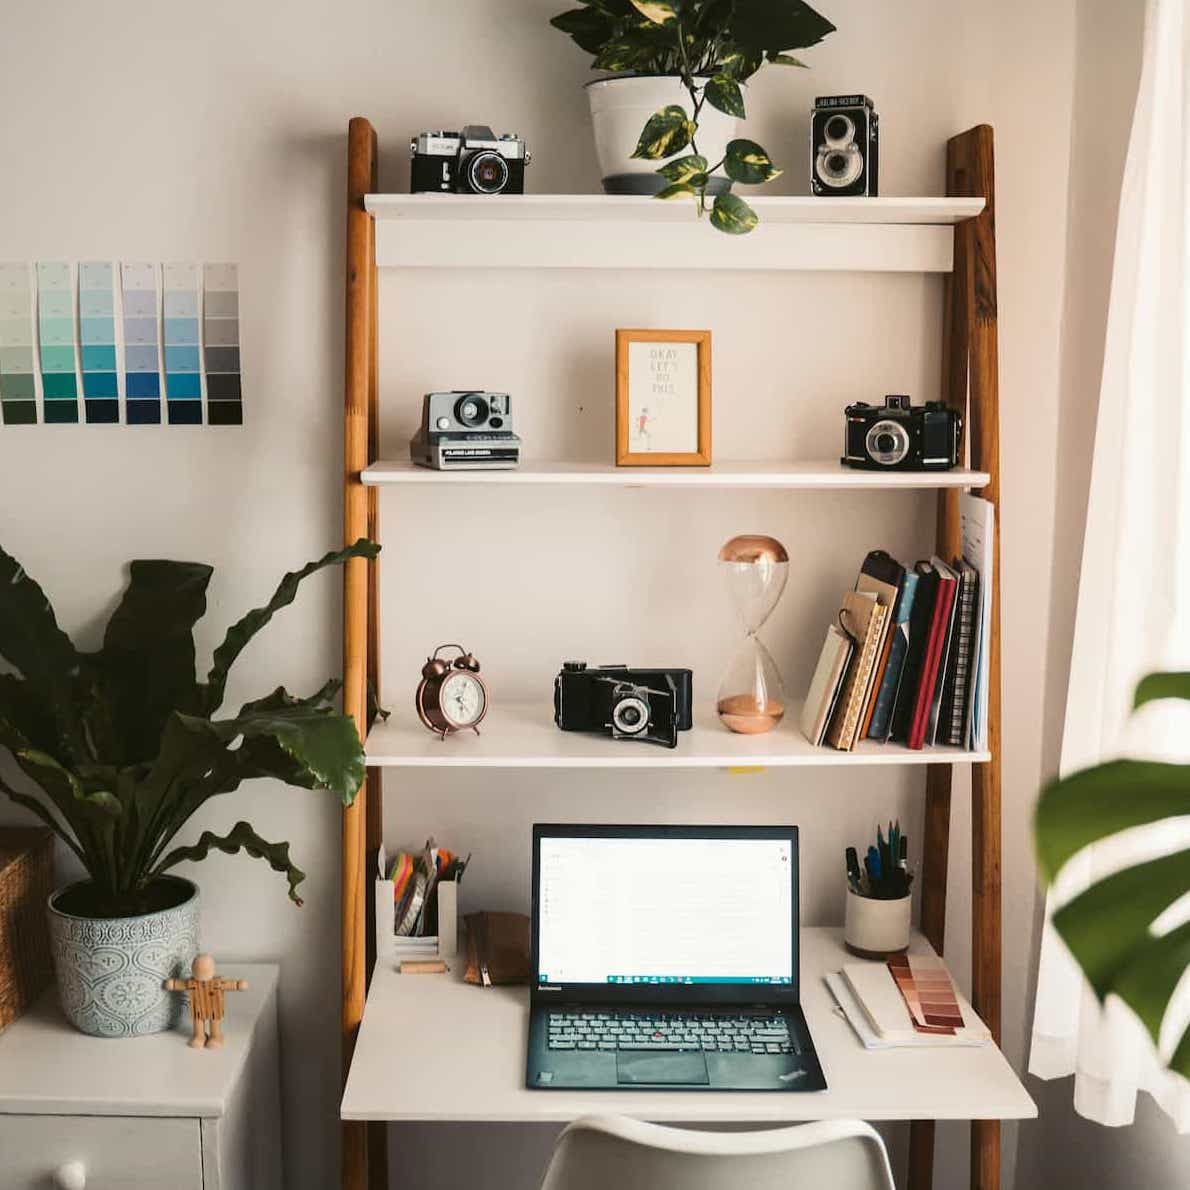 Work from home setup with open laptop on a desk, plants and wall shelf